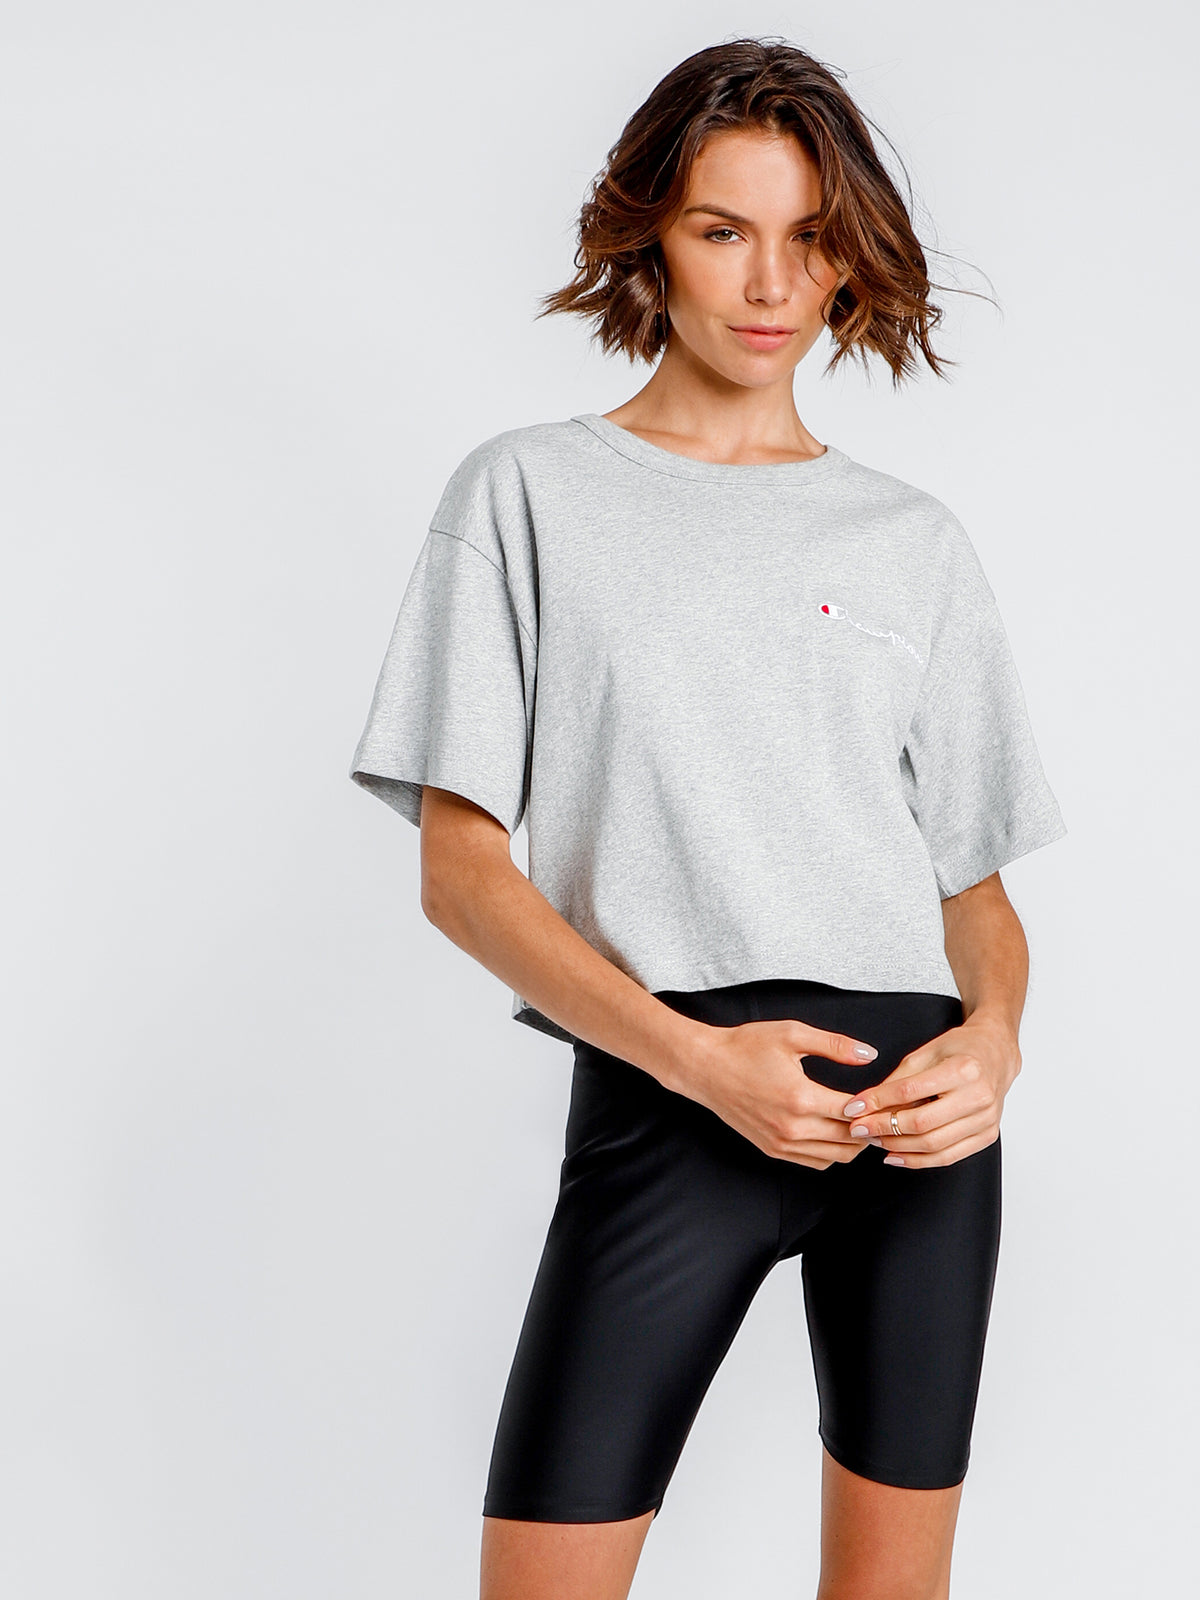 Cropped T-Shirt in Grey